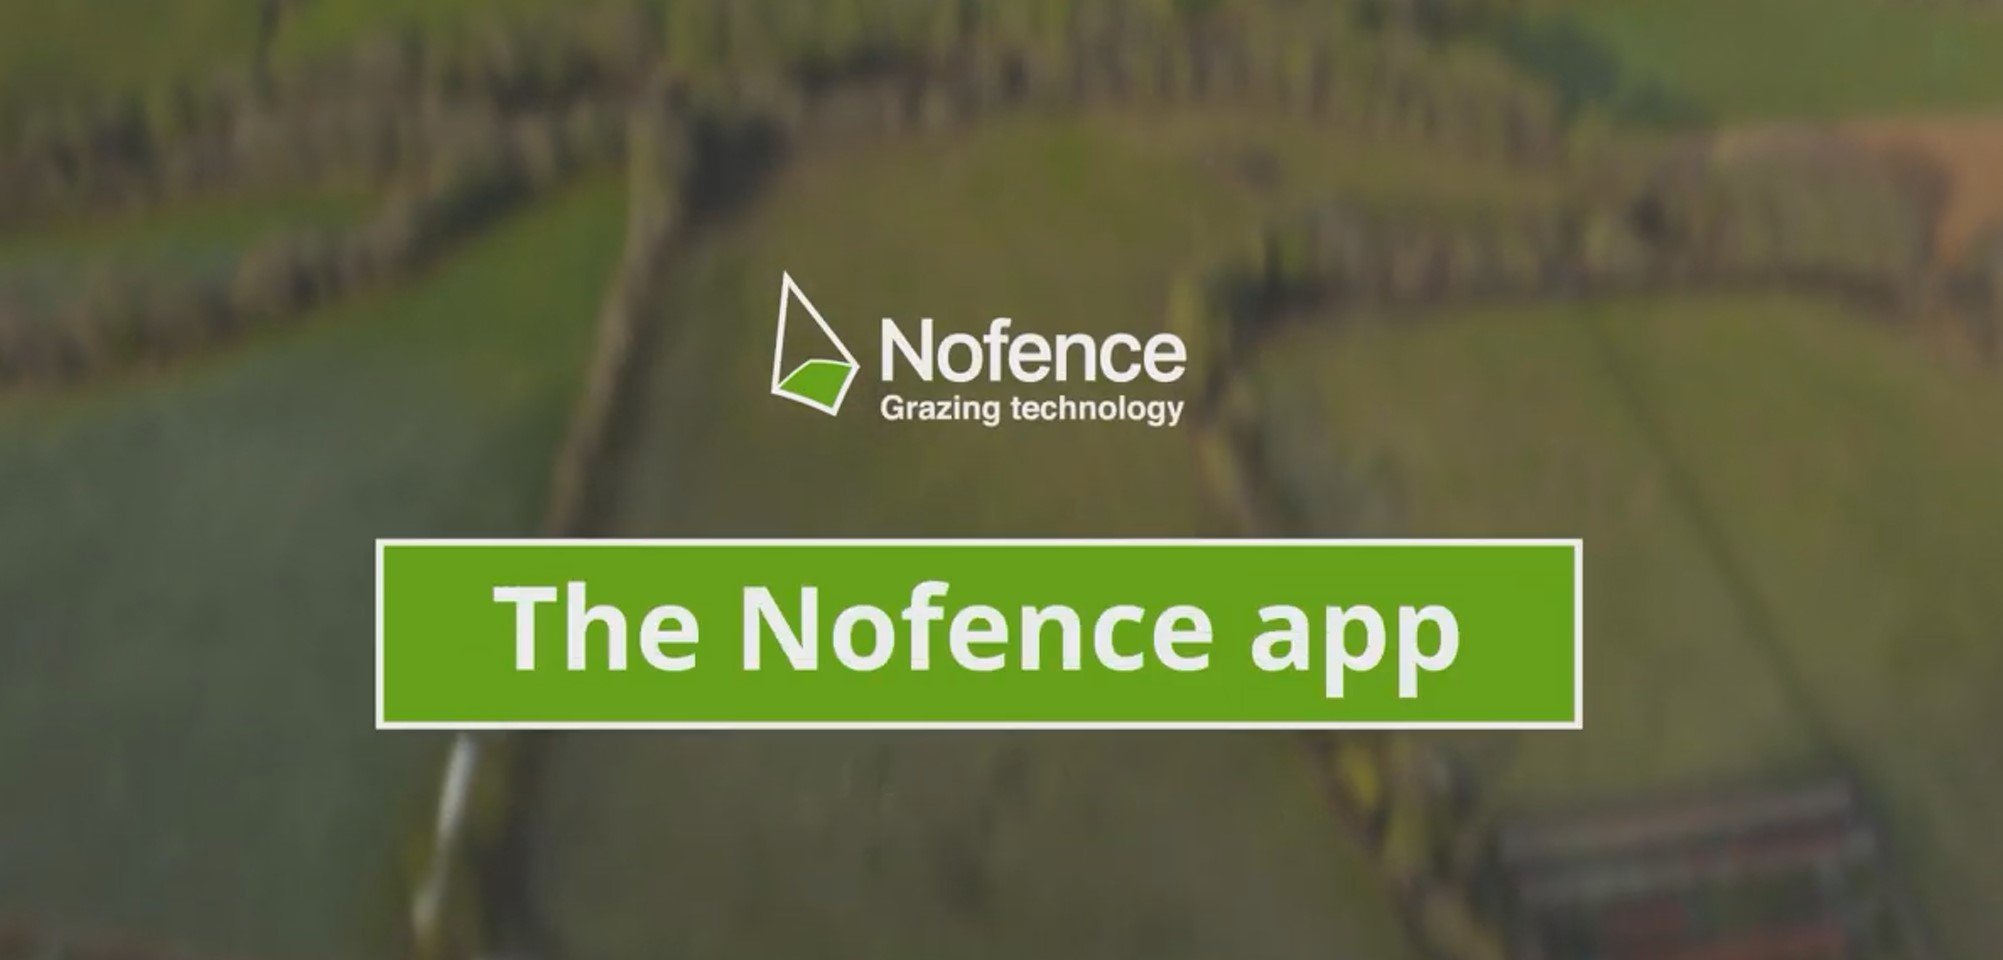 The Nofence app